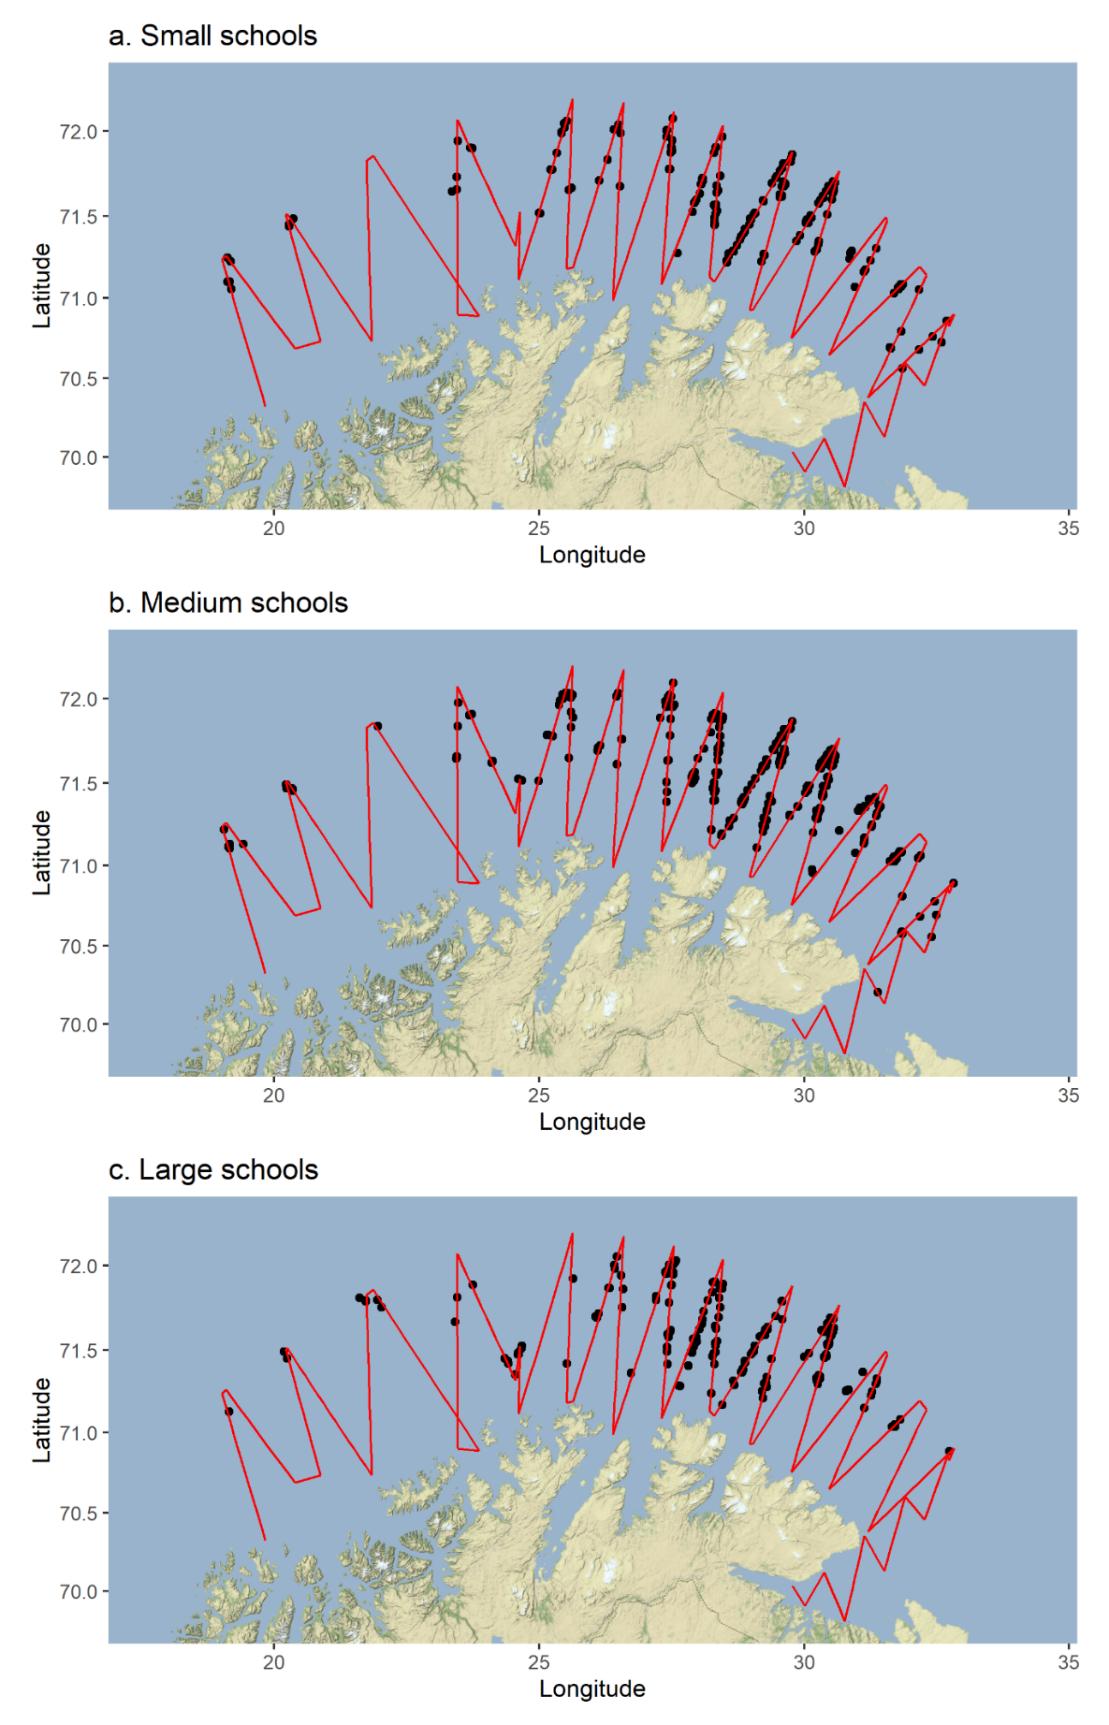 Figure A3. Schools detected with sonar split into small, medium and large schools. Red lines are the transect lines.